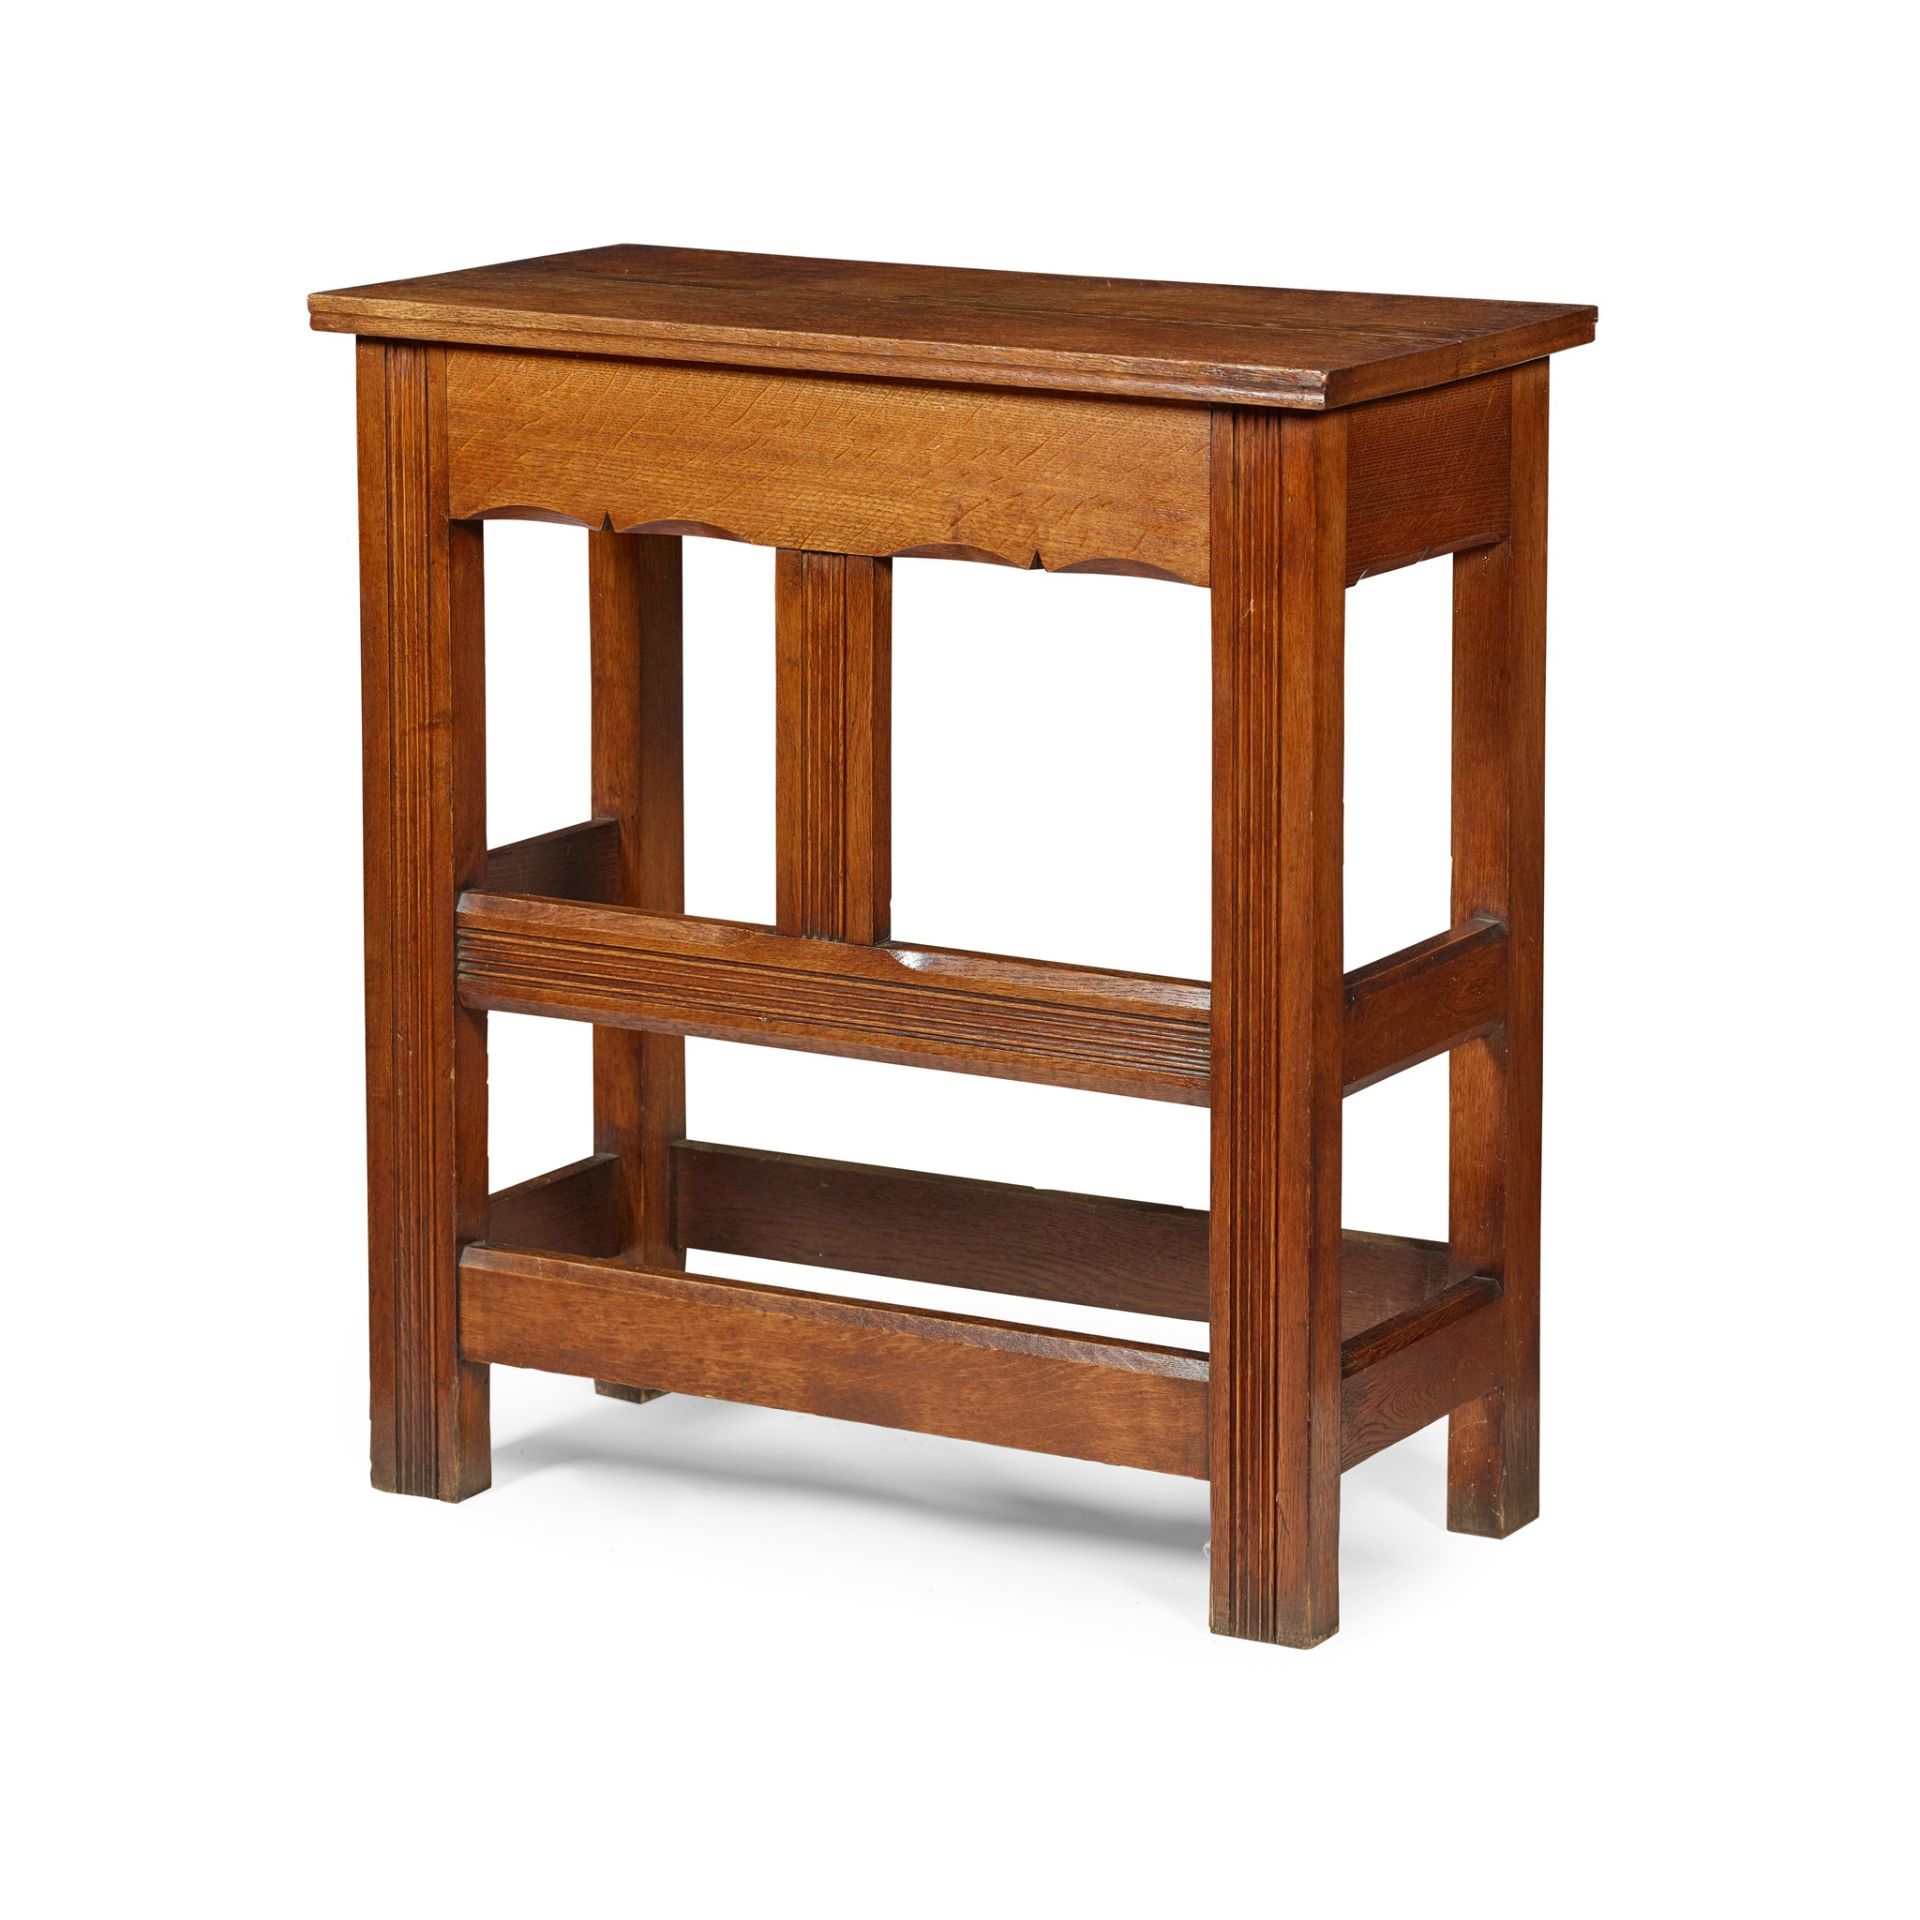 ENGLISH, MANNER OF PHILIP WEBB ARTS & CRAFTS SIDE TABLE, CIRCA 1900